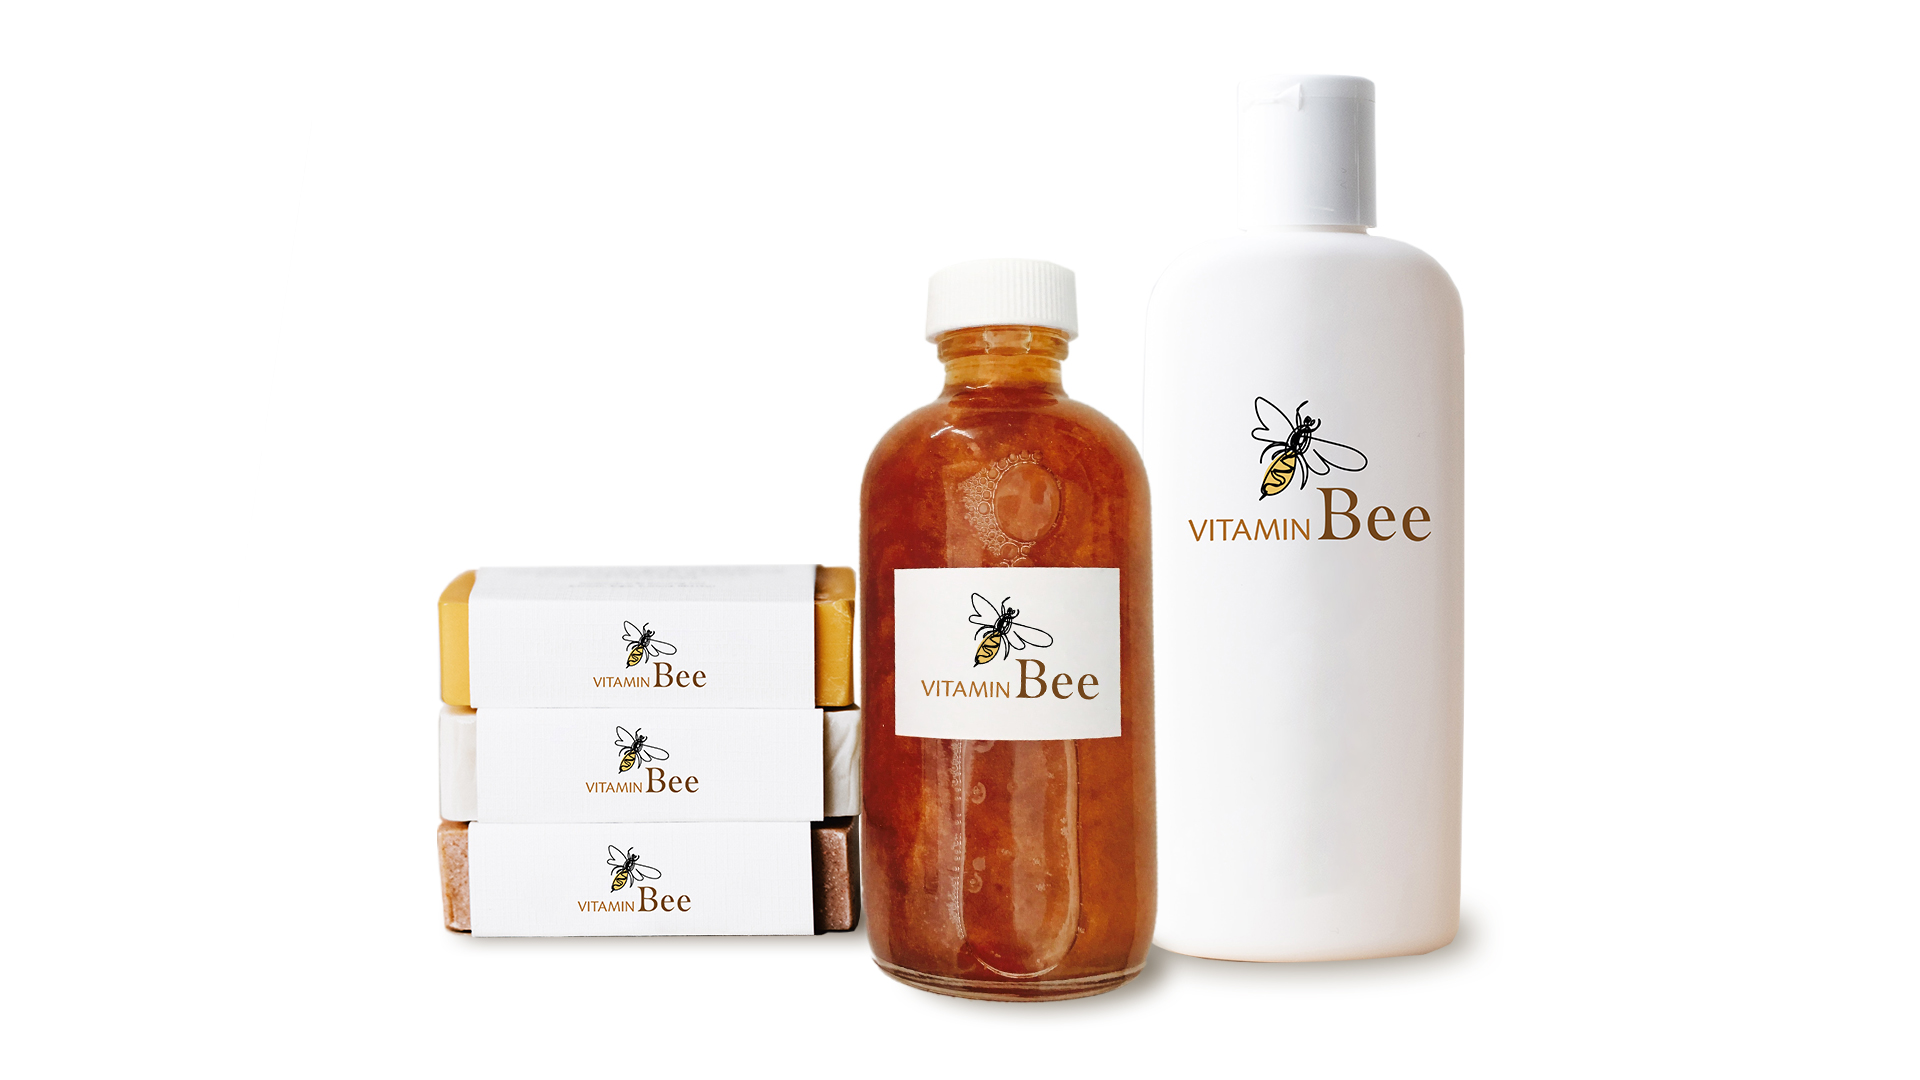 Two bottles and three pieces of soap with the Vitamin Bee branding.